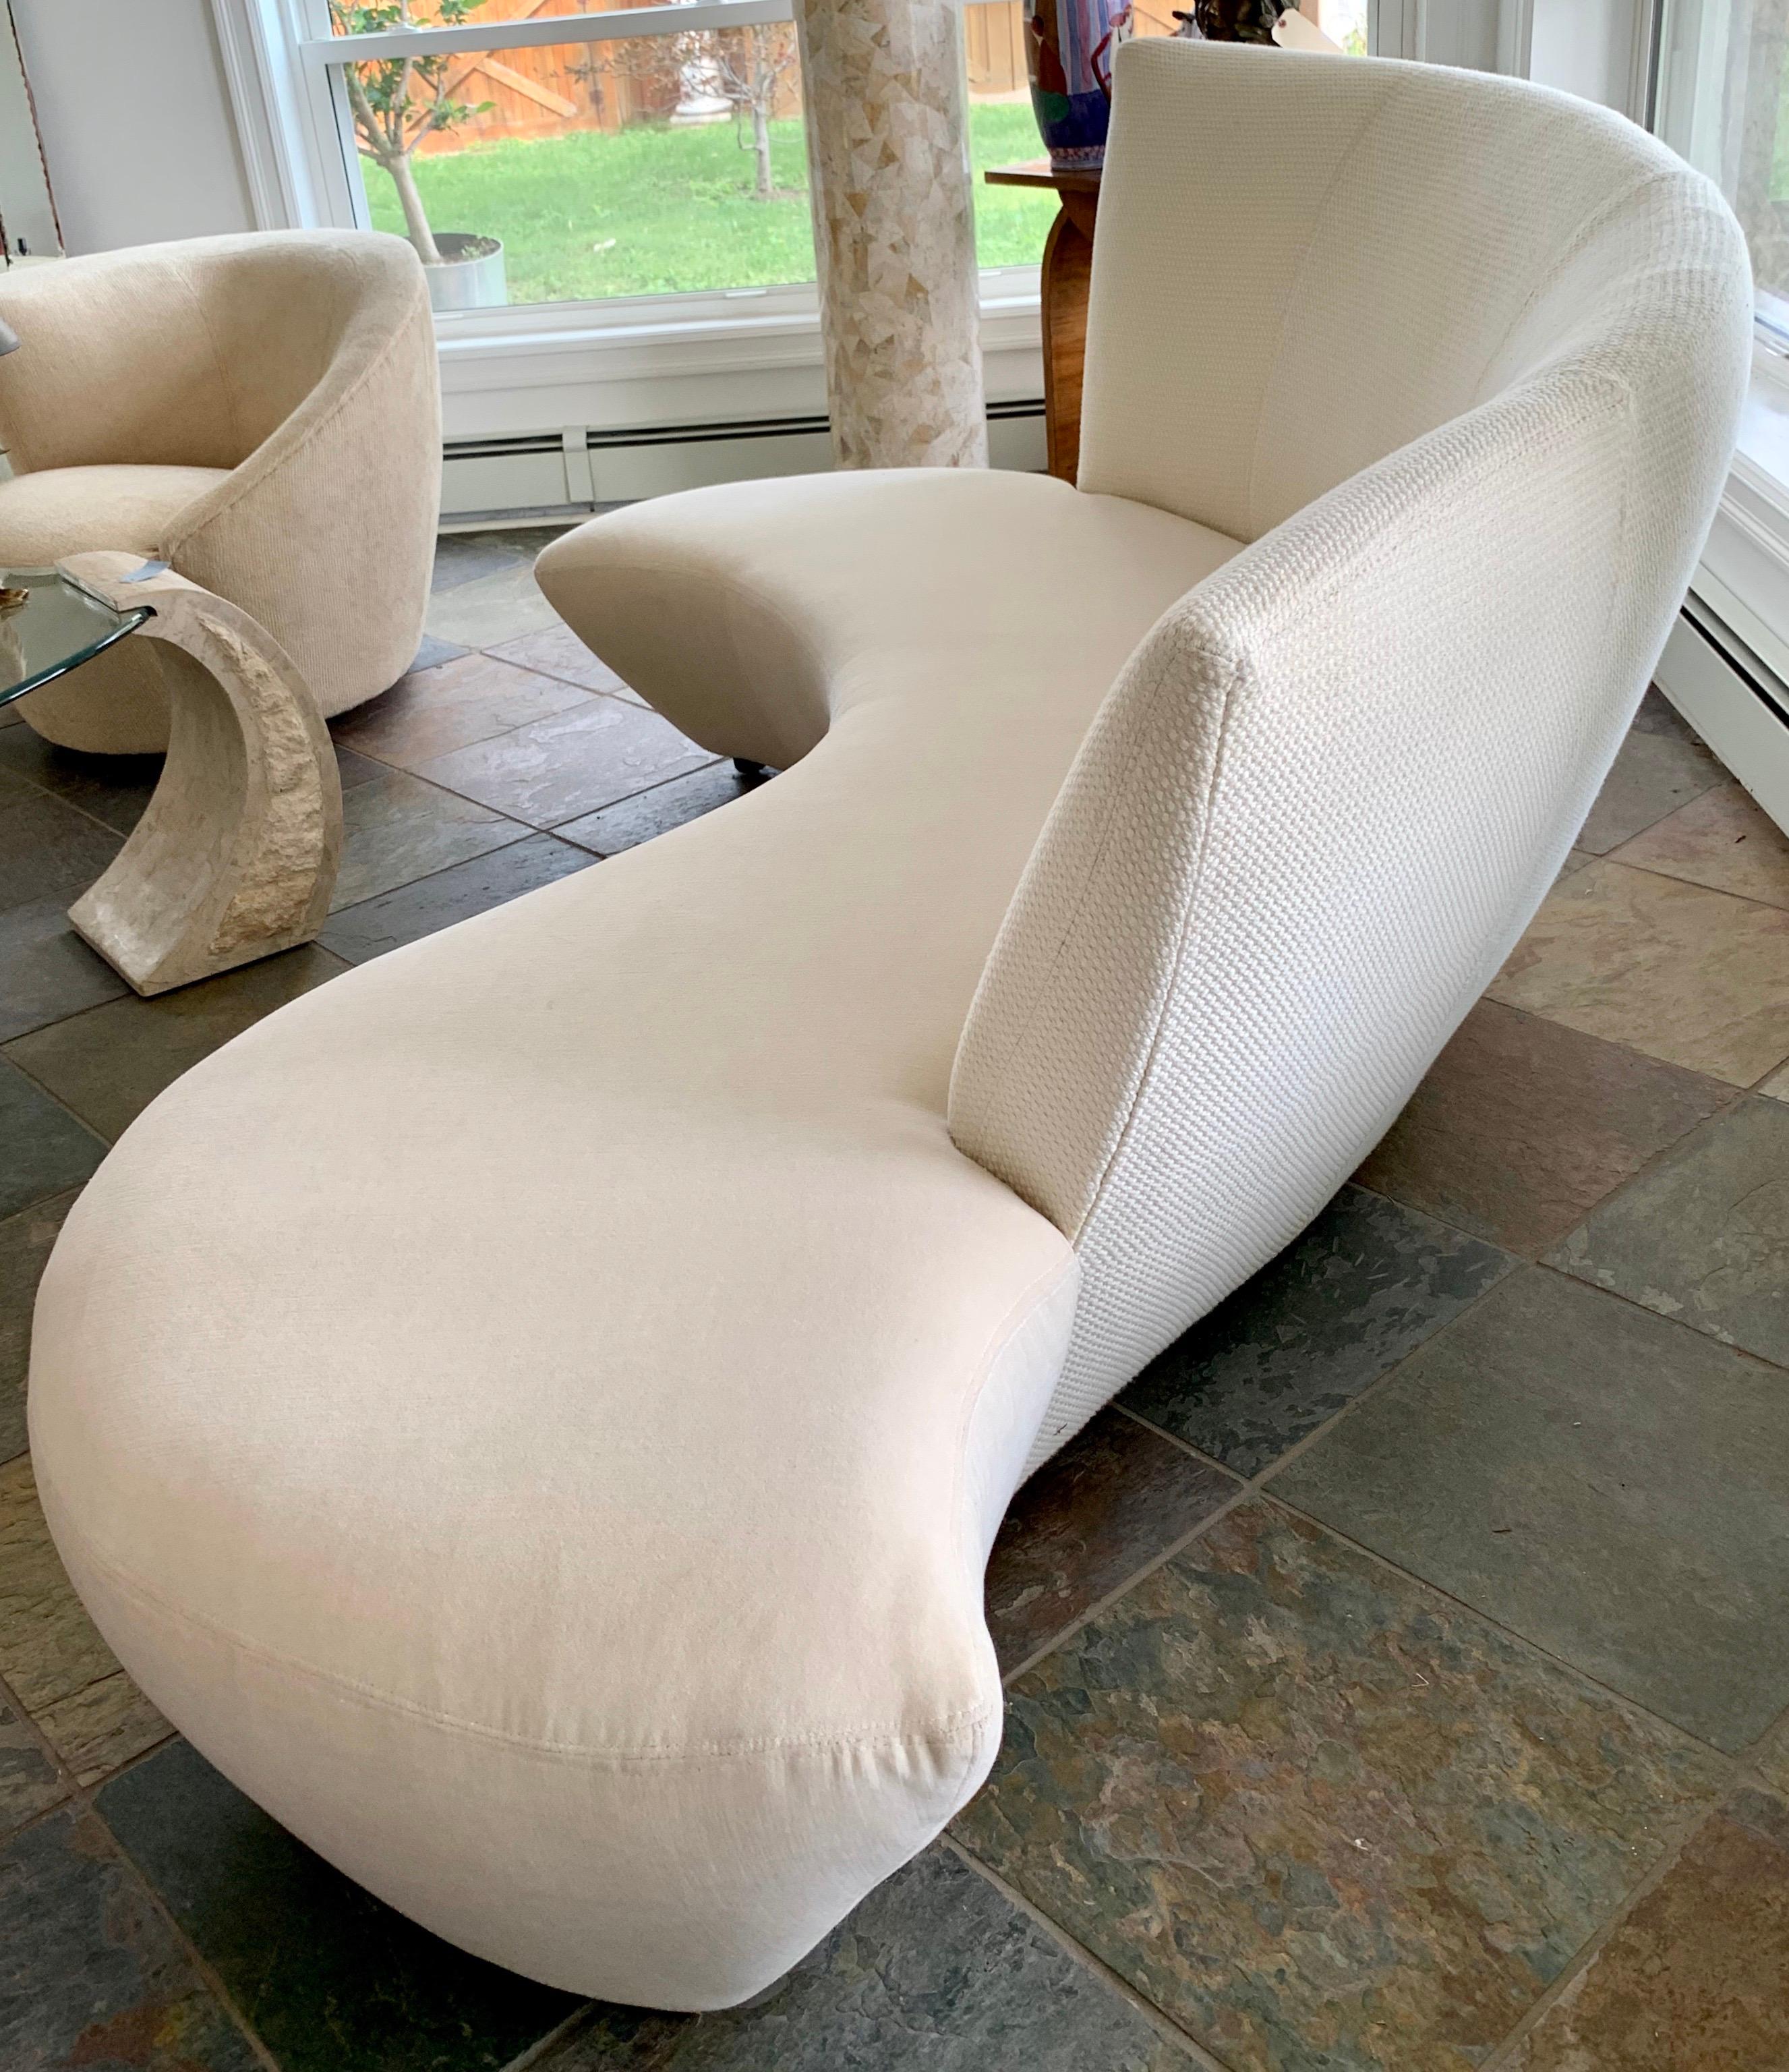 A sculptural modern sofa designed by Vladimir Kagan and inspired by the curves and undulations of the Guggenheim Museum in Bilbao, Spain. It was newly reupholstered last year and is stunning. Rare to see a serpentine Kagan sofa in such good